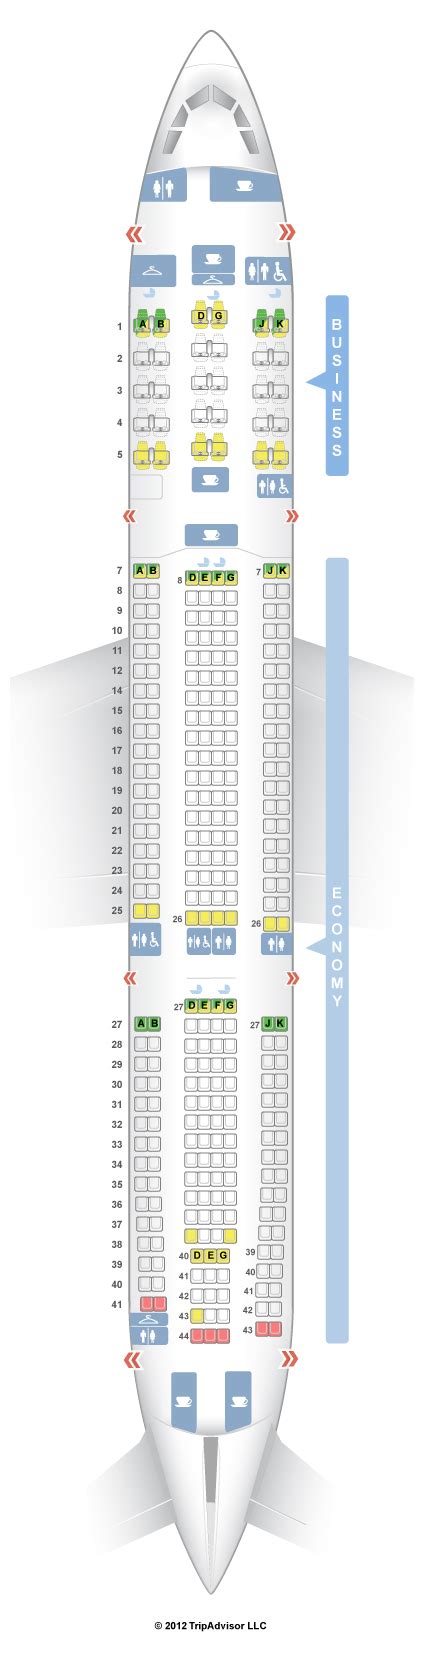 Airbus A Neo Seat Map Image To U